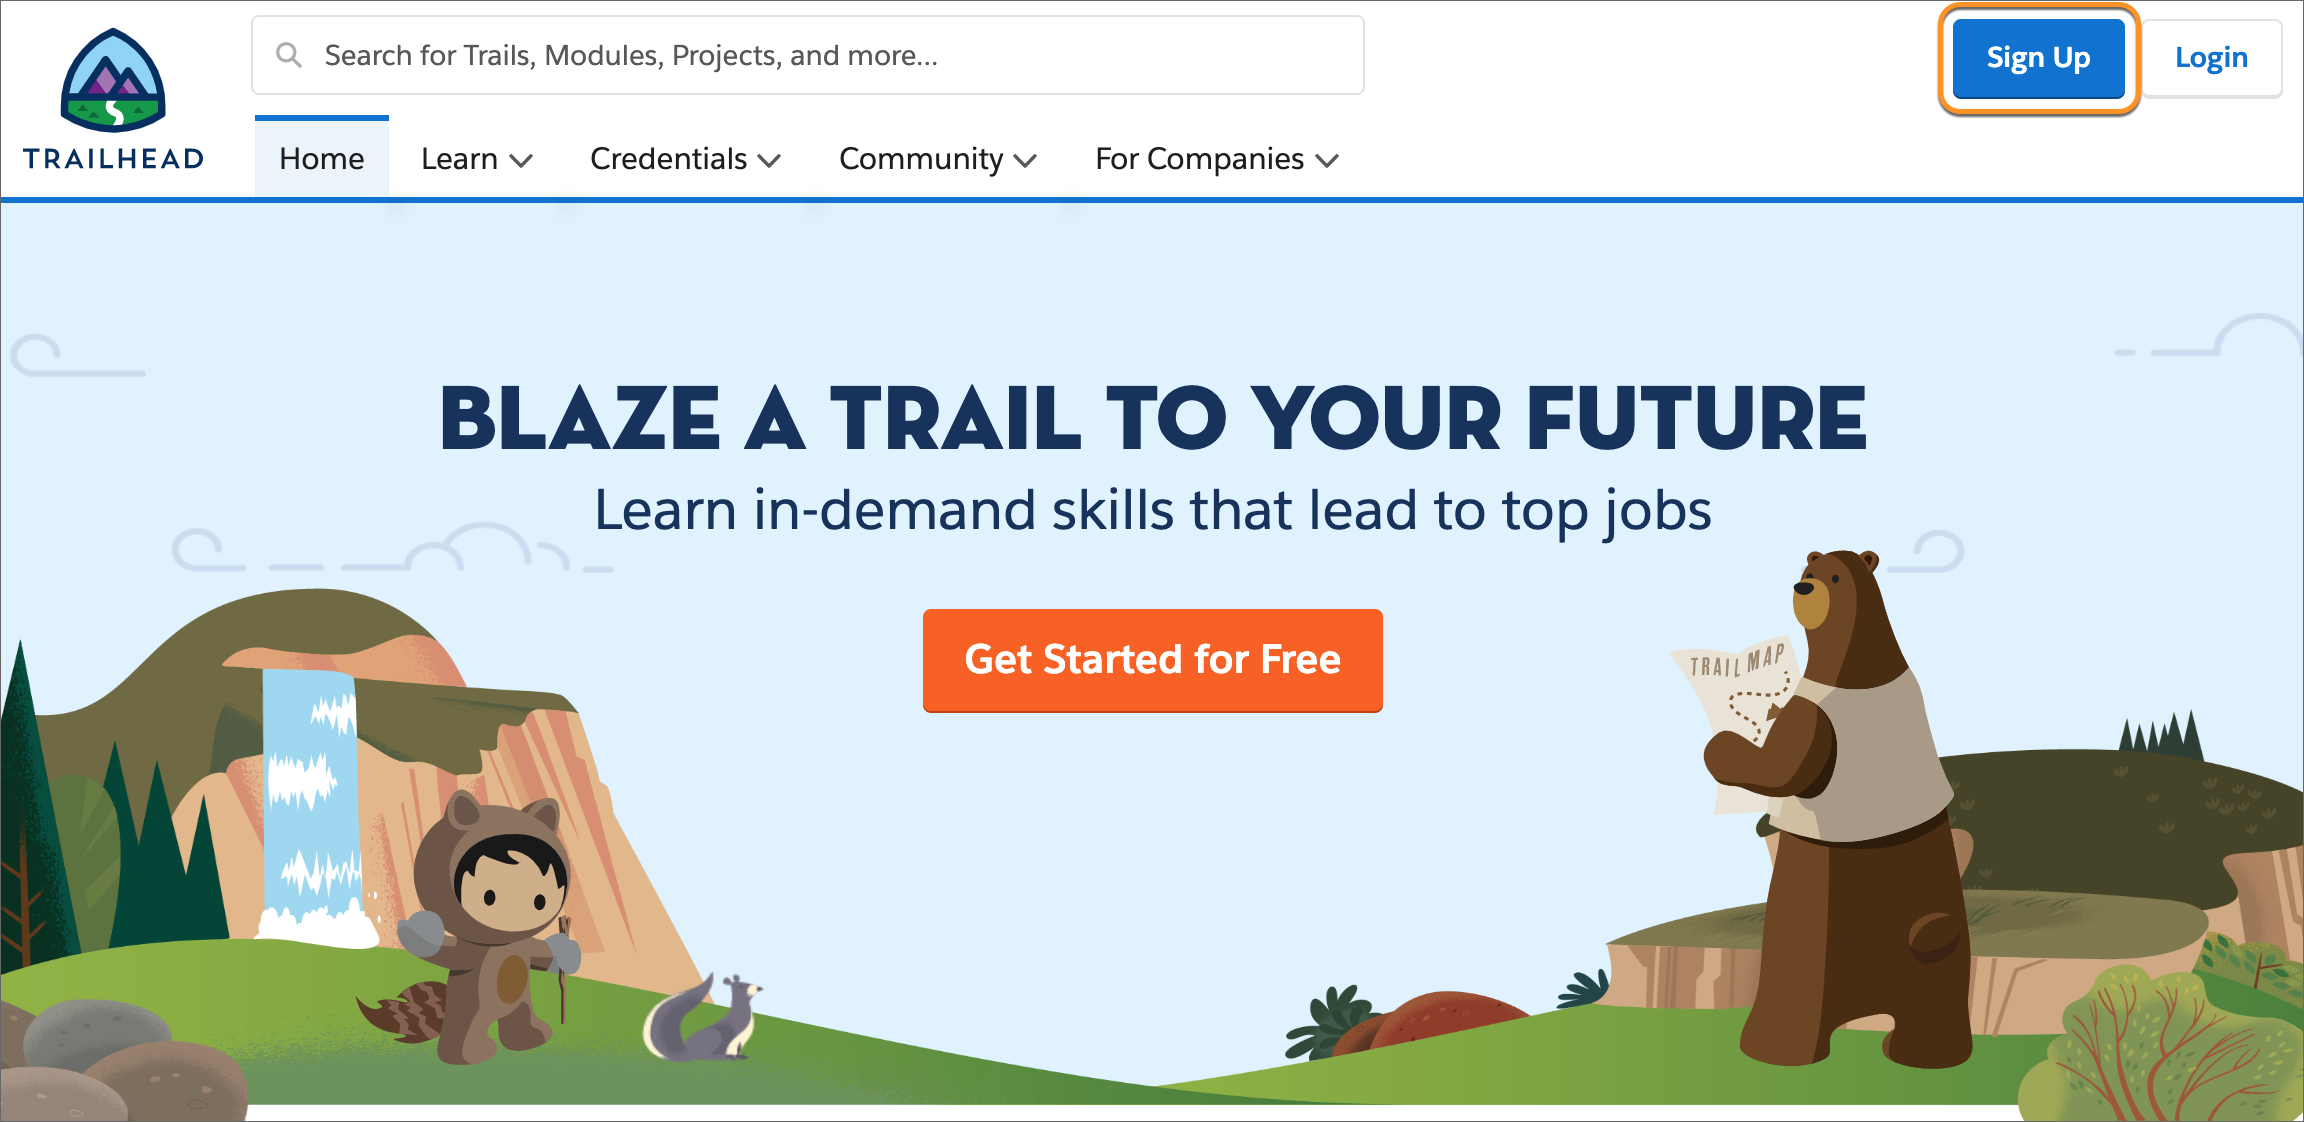 Who is Trailhead for